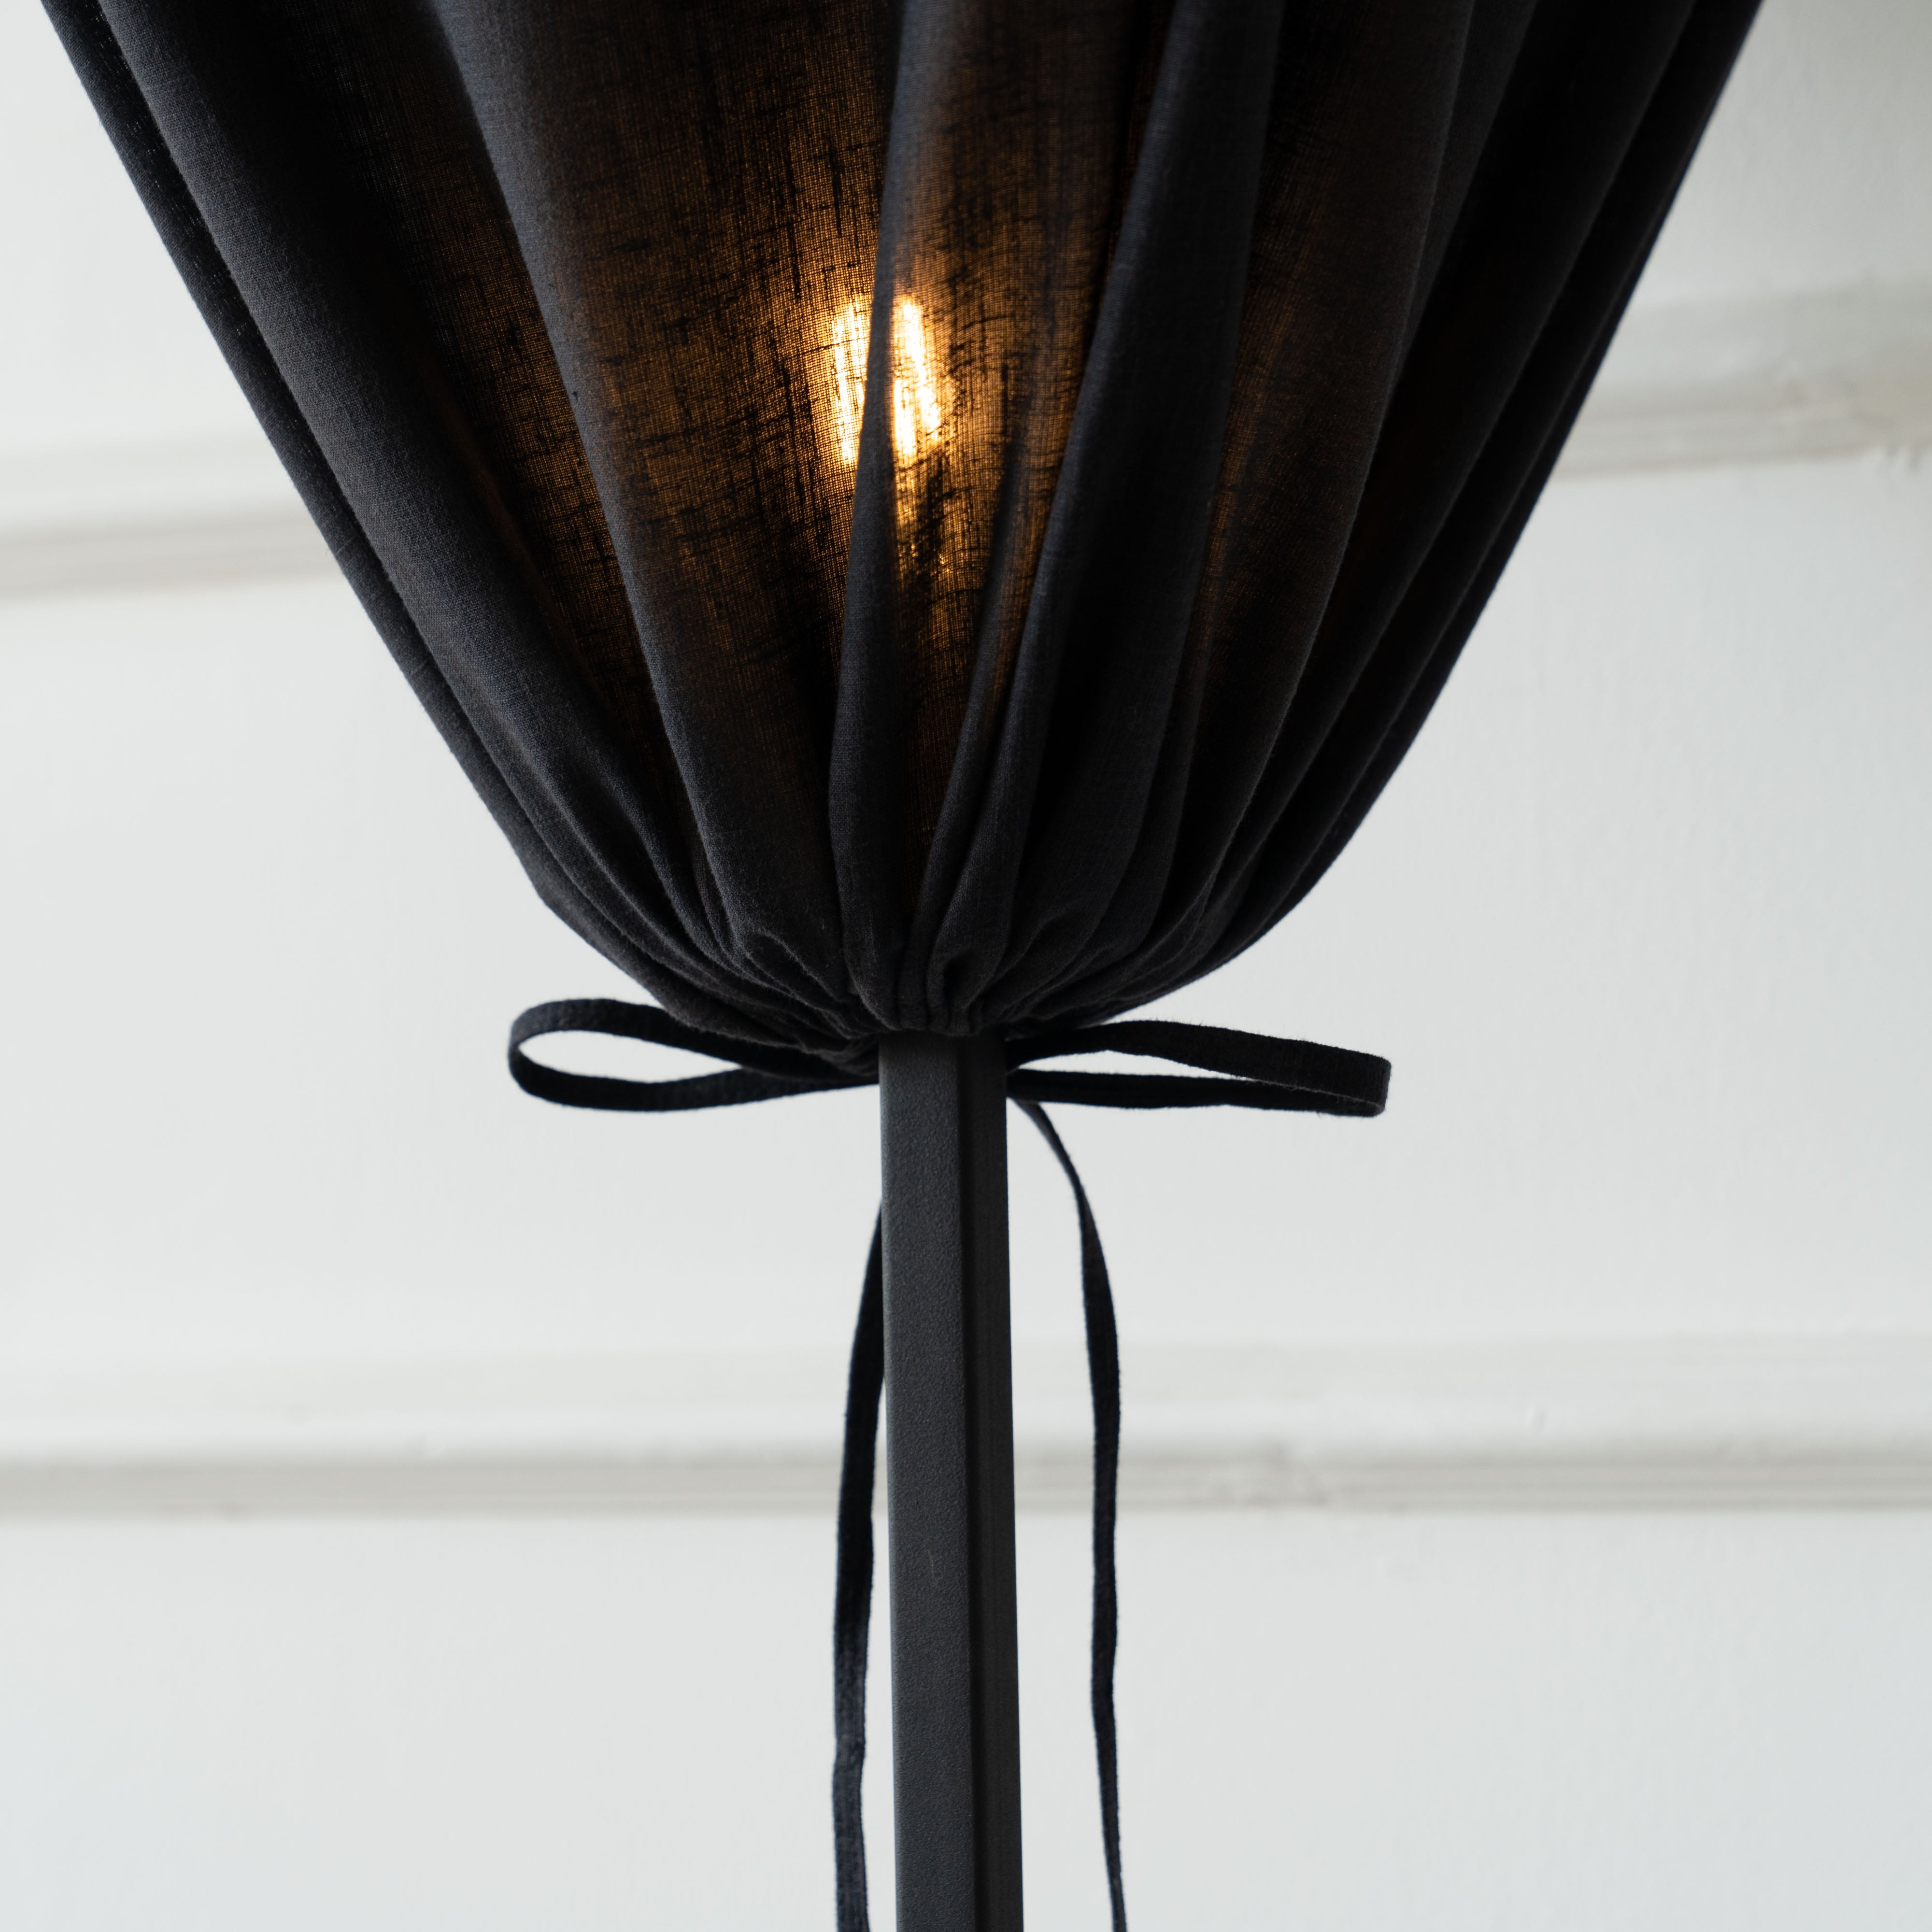 Bellona Lamp - Wood and Steel Furnitures